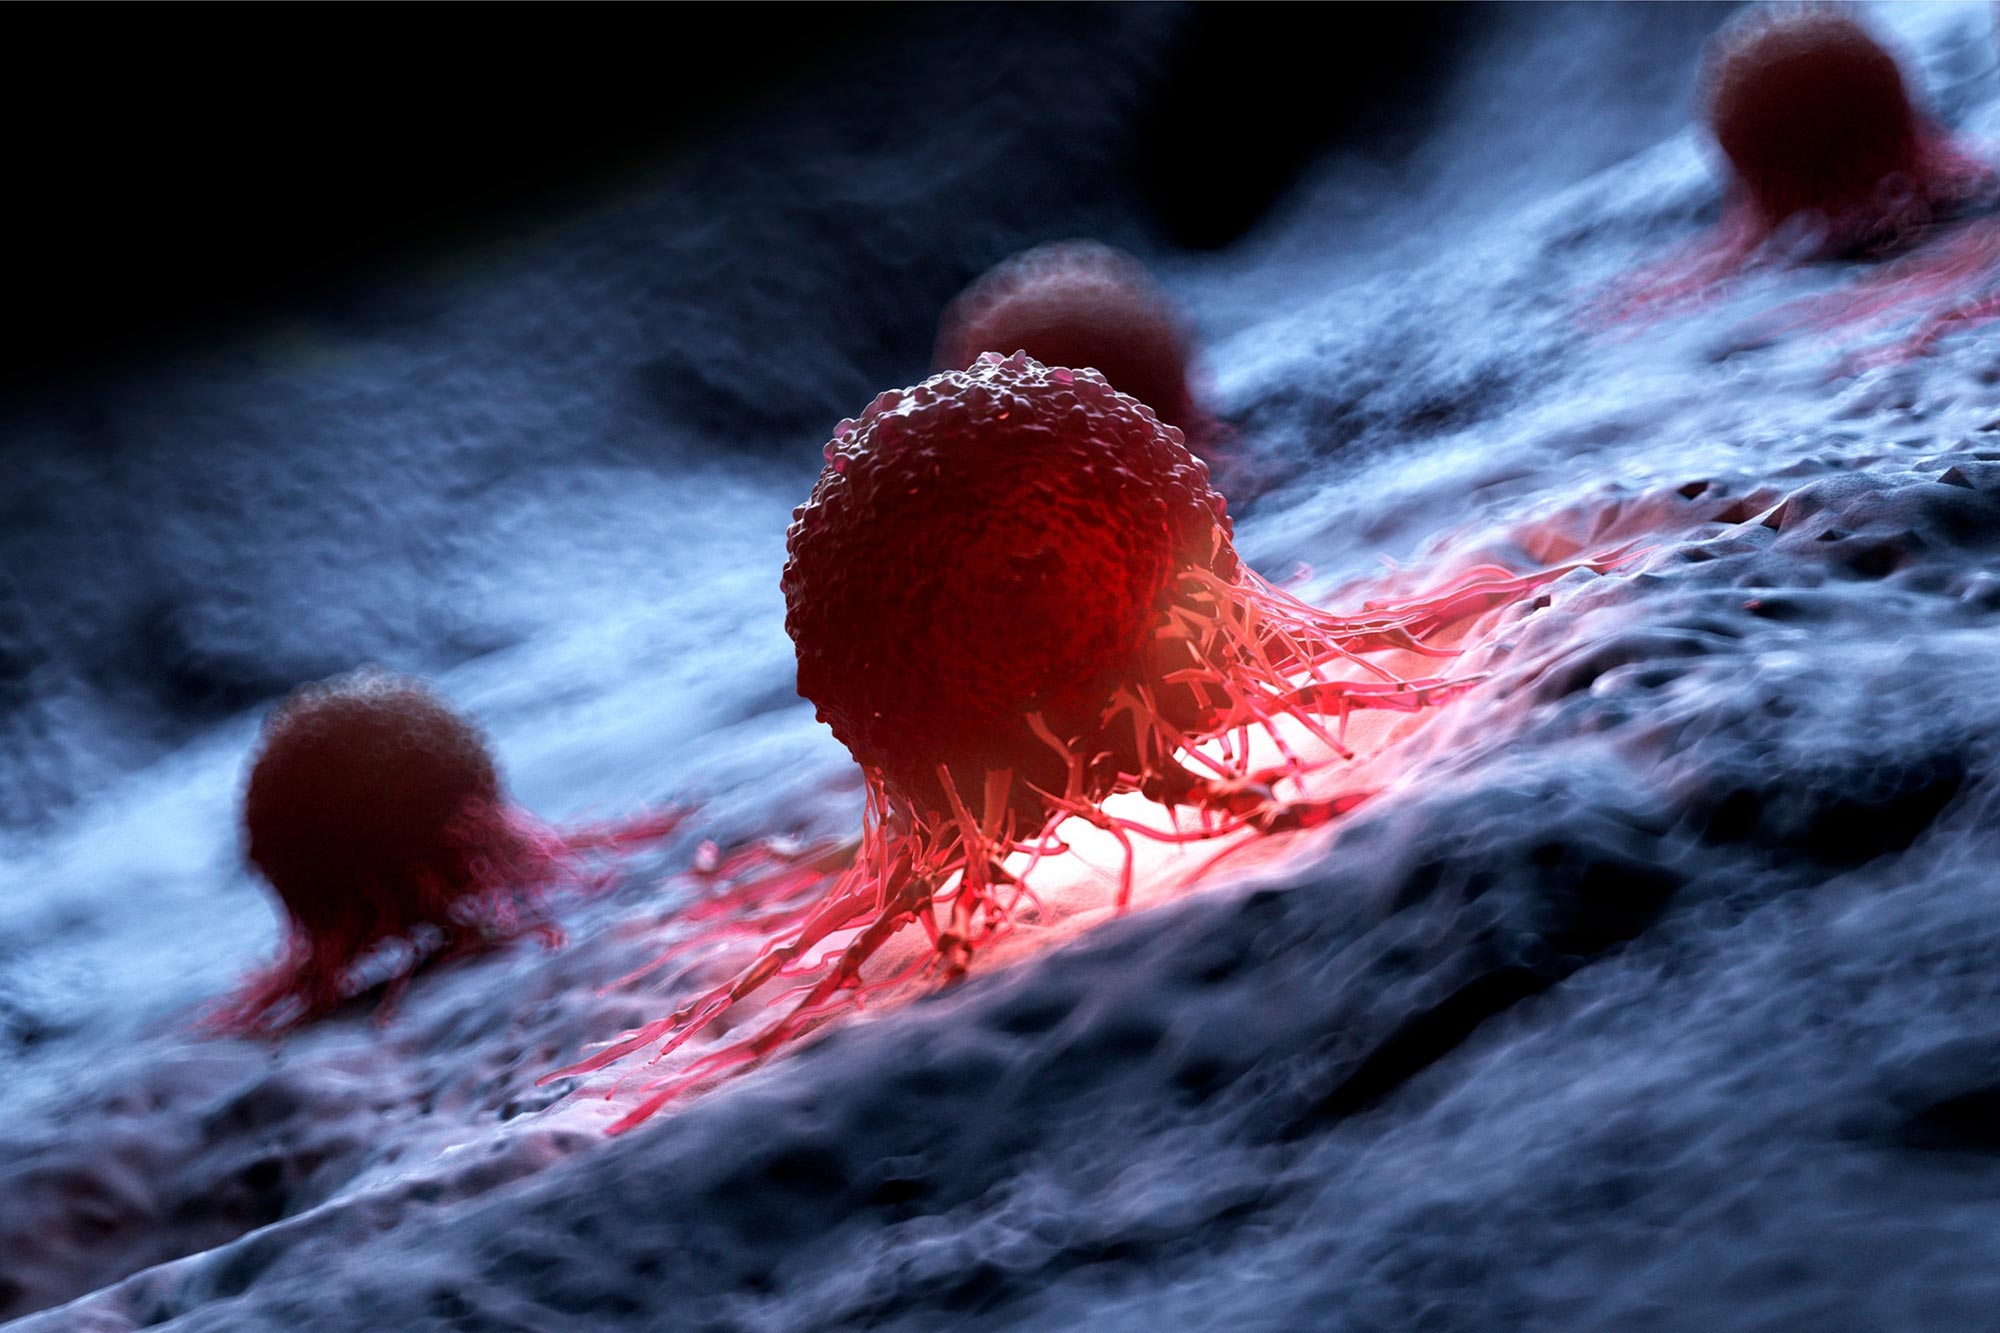 Illustration of human cancer cell